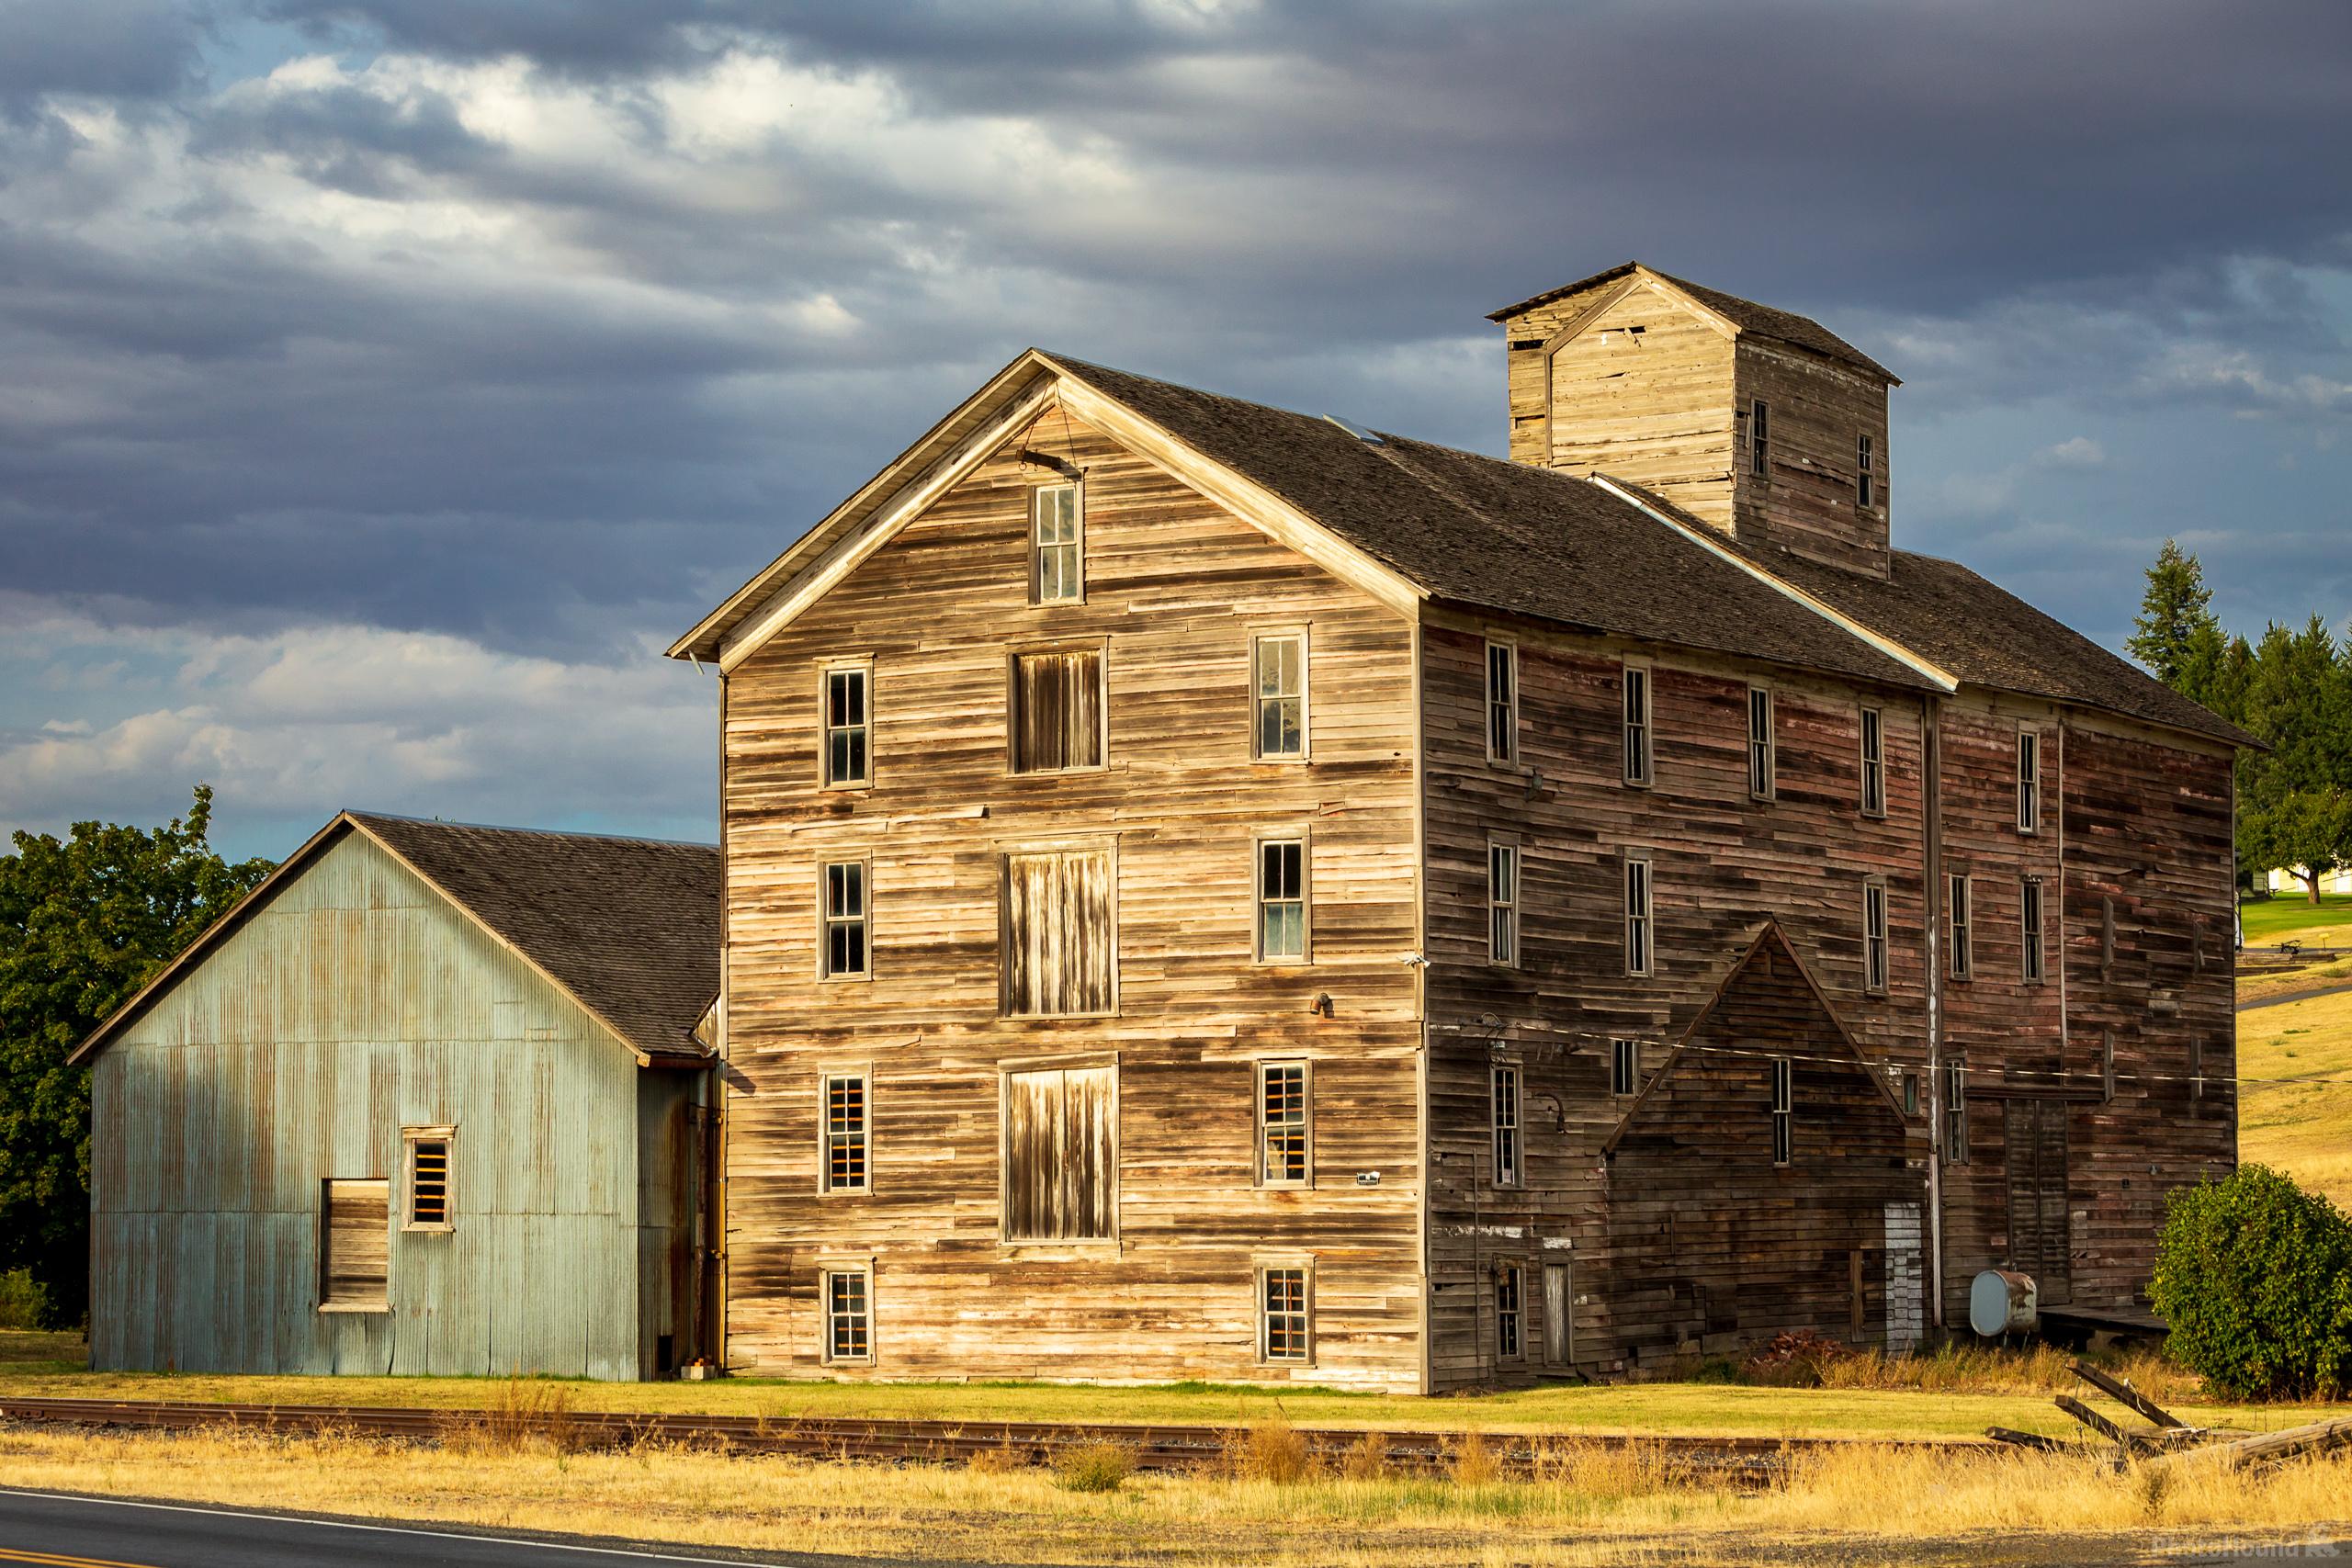 Image of Oakesdale by Joe Becker